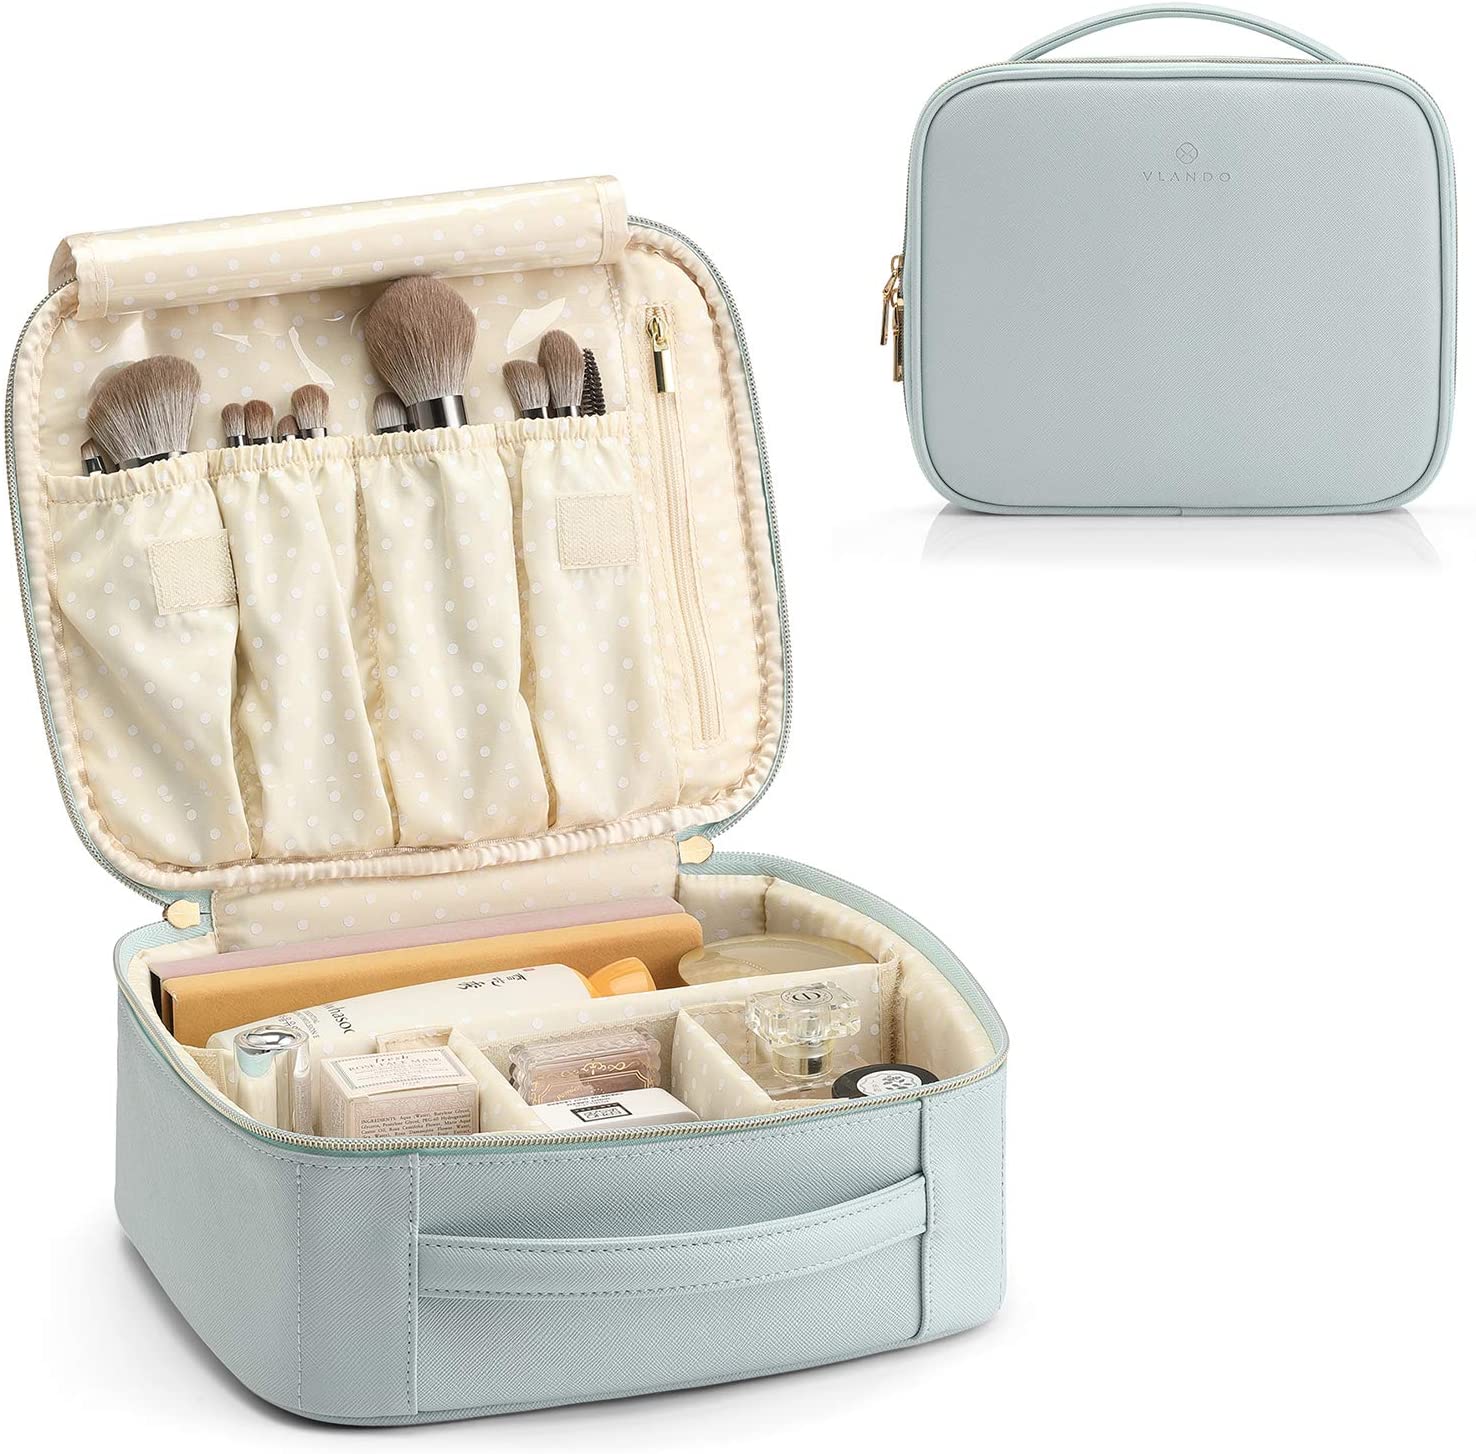 Oooh new goodies for traveling how stinking cute are they! The cube de  rangement pm,mm,gm. @…